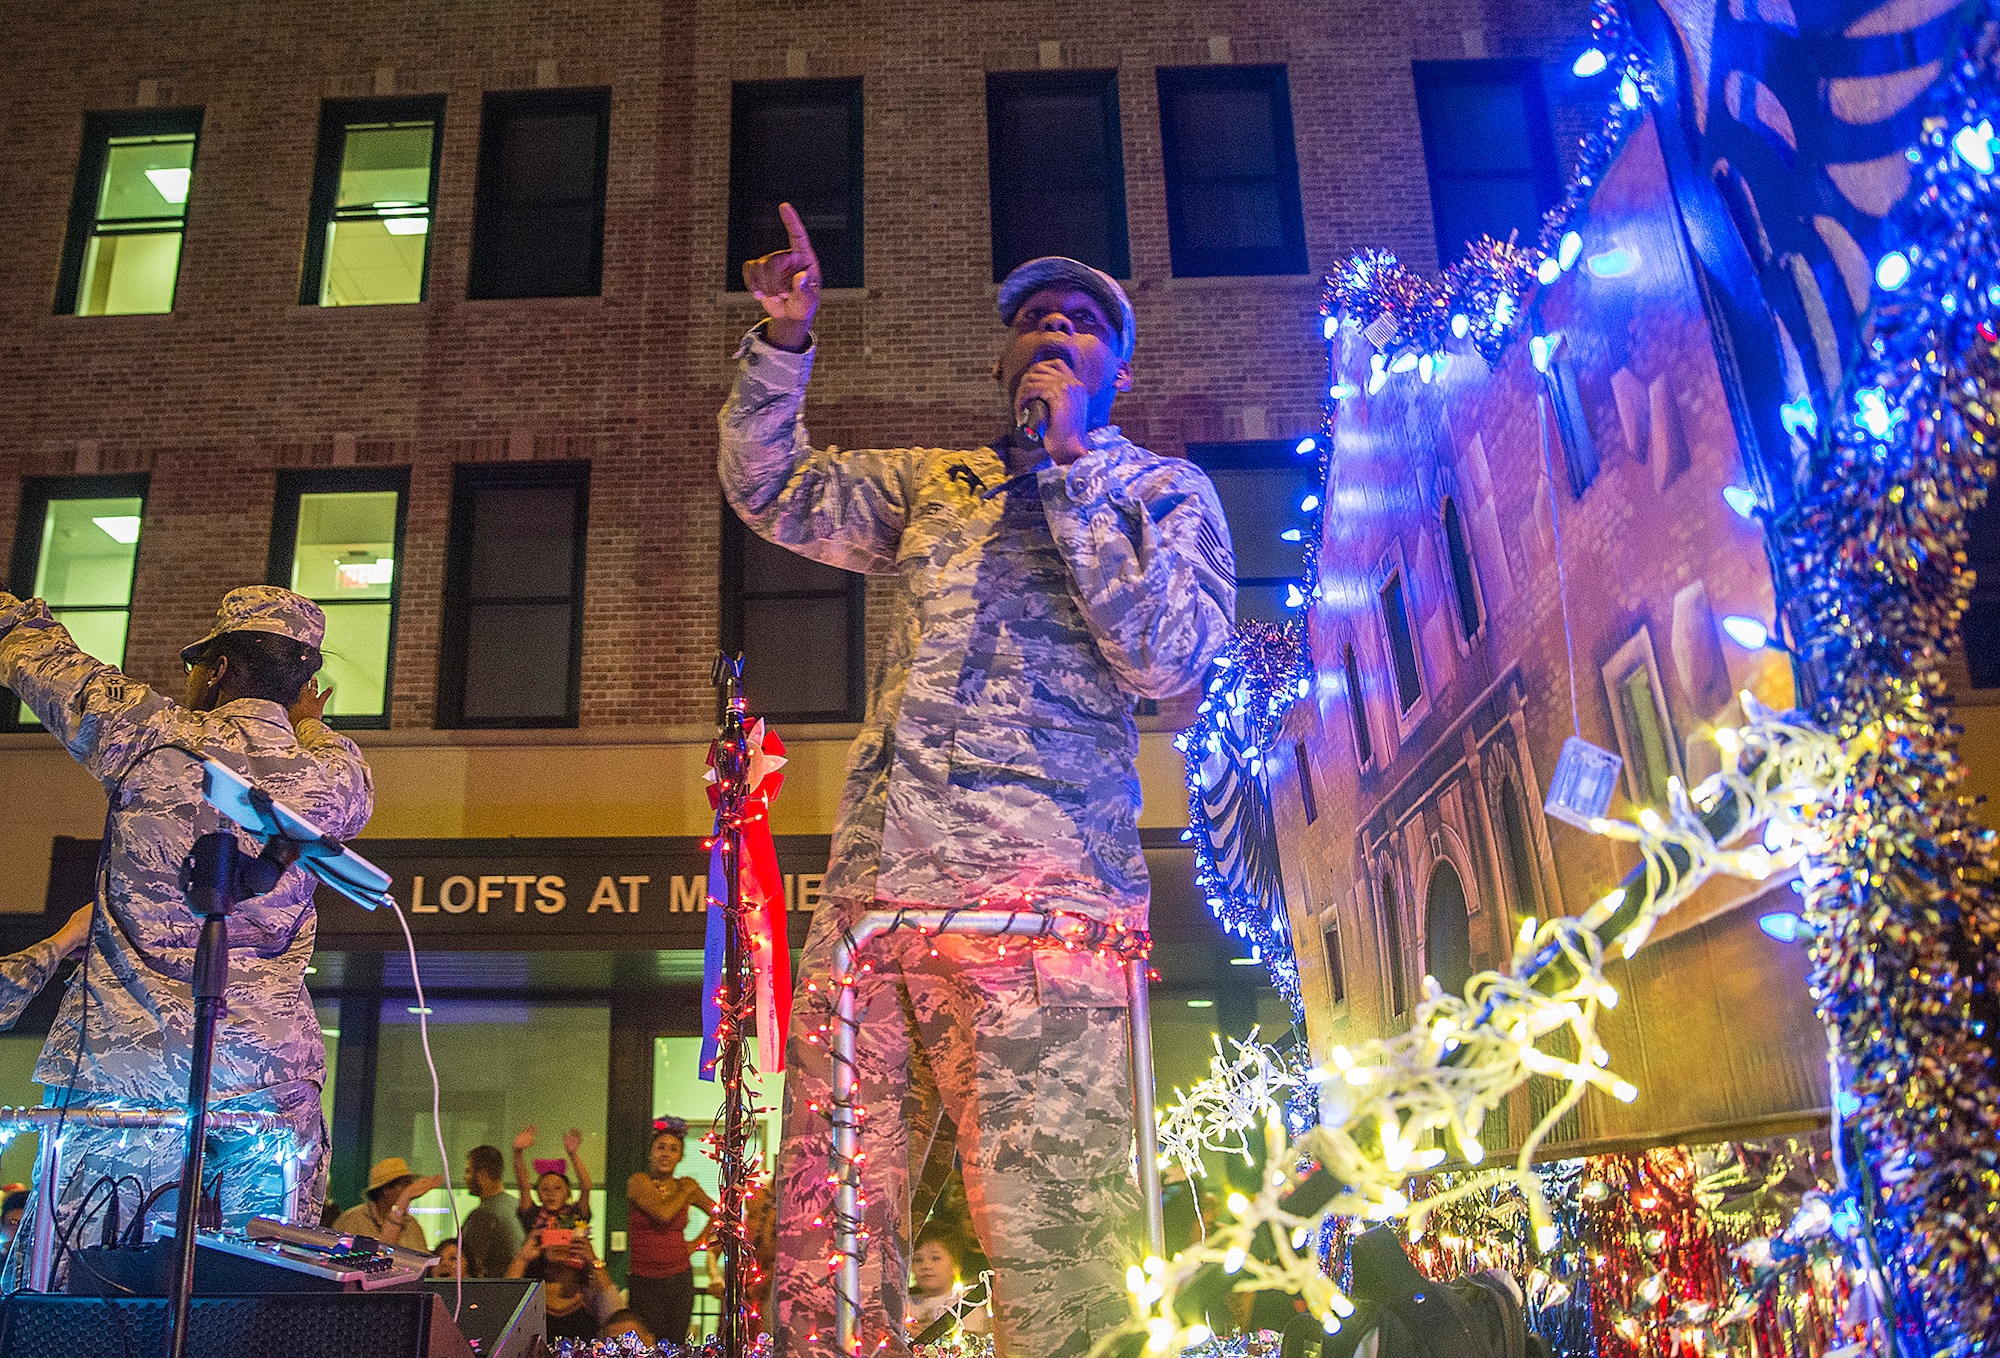 Tech. Sgt. Robert Carter, 531st Intelligence Squadron section chief knowledge operations, sings to the crowd as the 433rd Airlift Wing float during the Fiesta Flambeau parade April 23, 2016. The Fiesta Flambeau parade is one of the largest illuminated parades in the world, with over 750,000 spectators and 1.5 million television viewers. (U.S. Air Force photo by Benjamin Faske) (released)